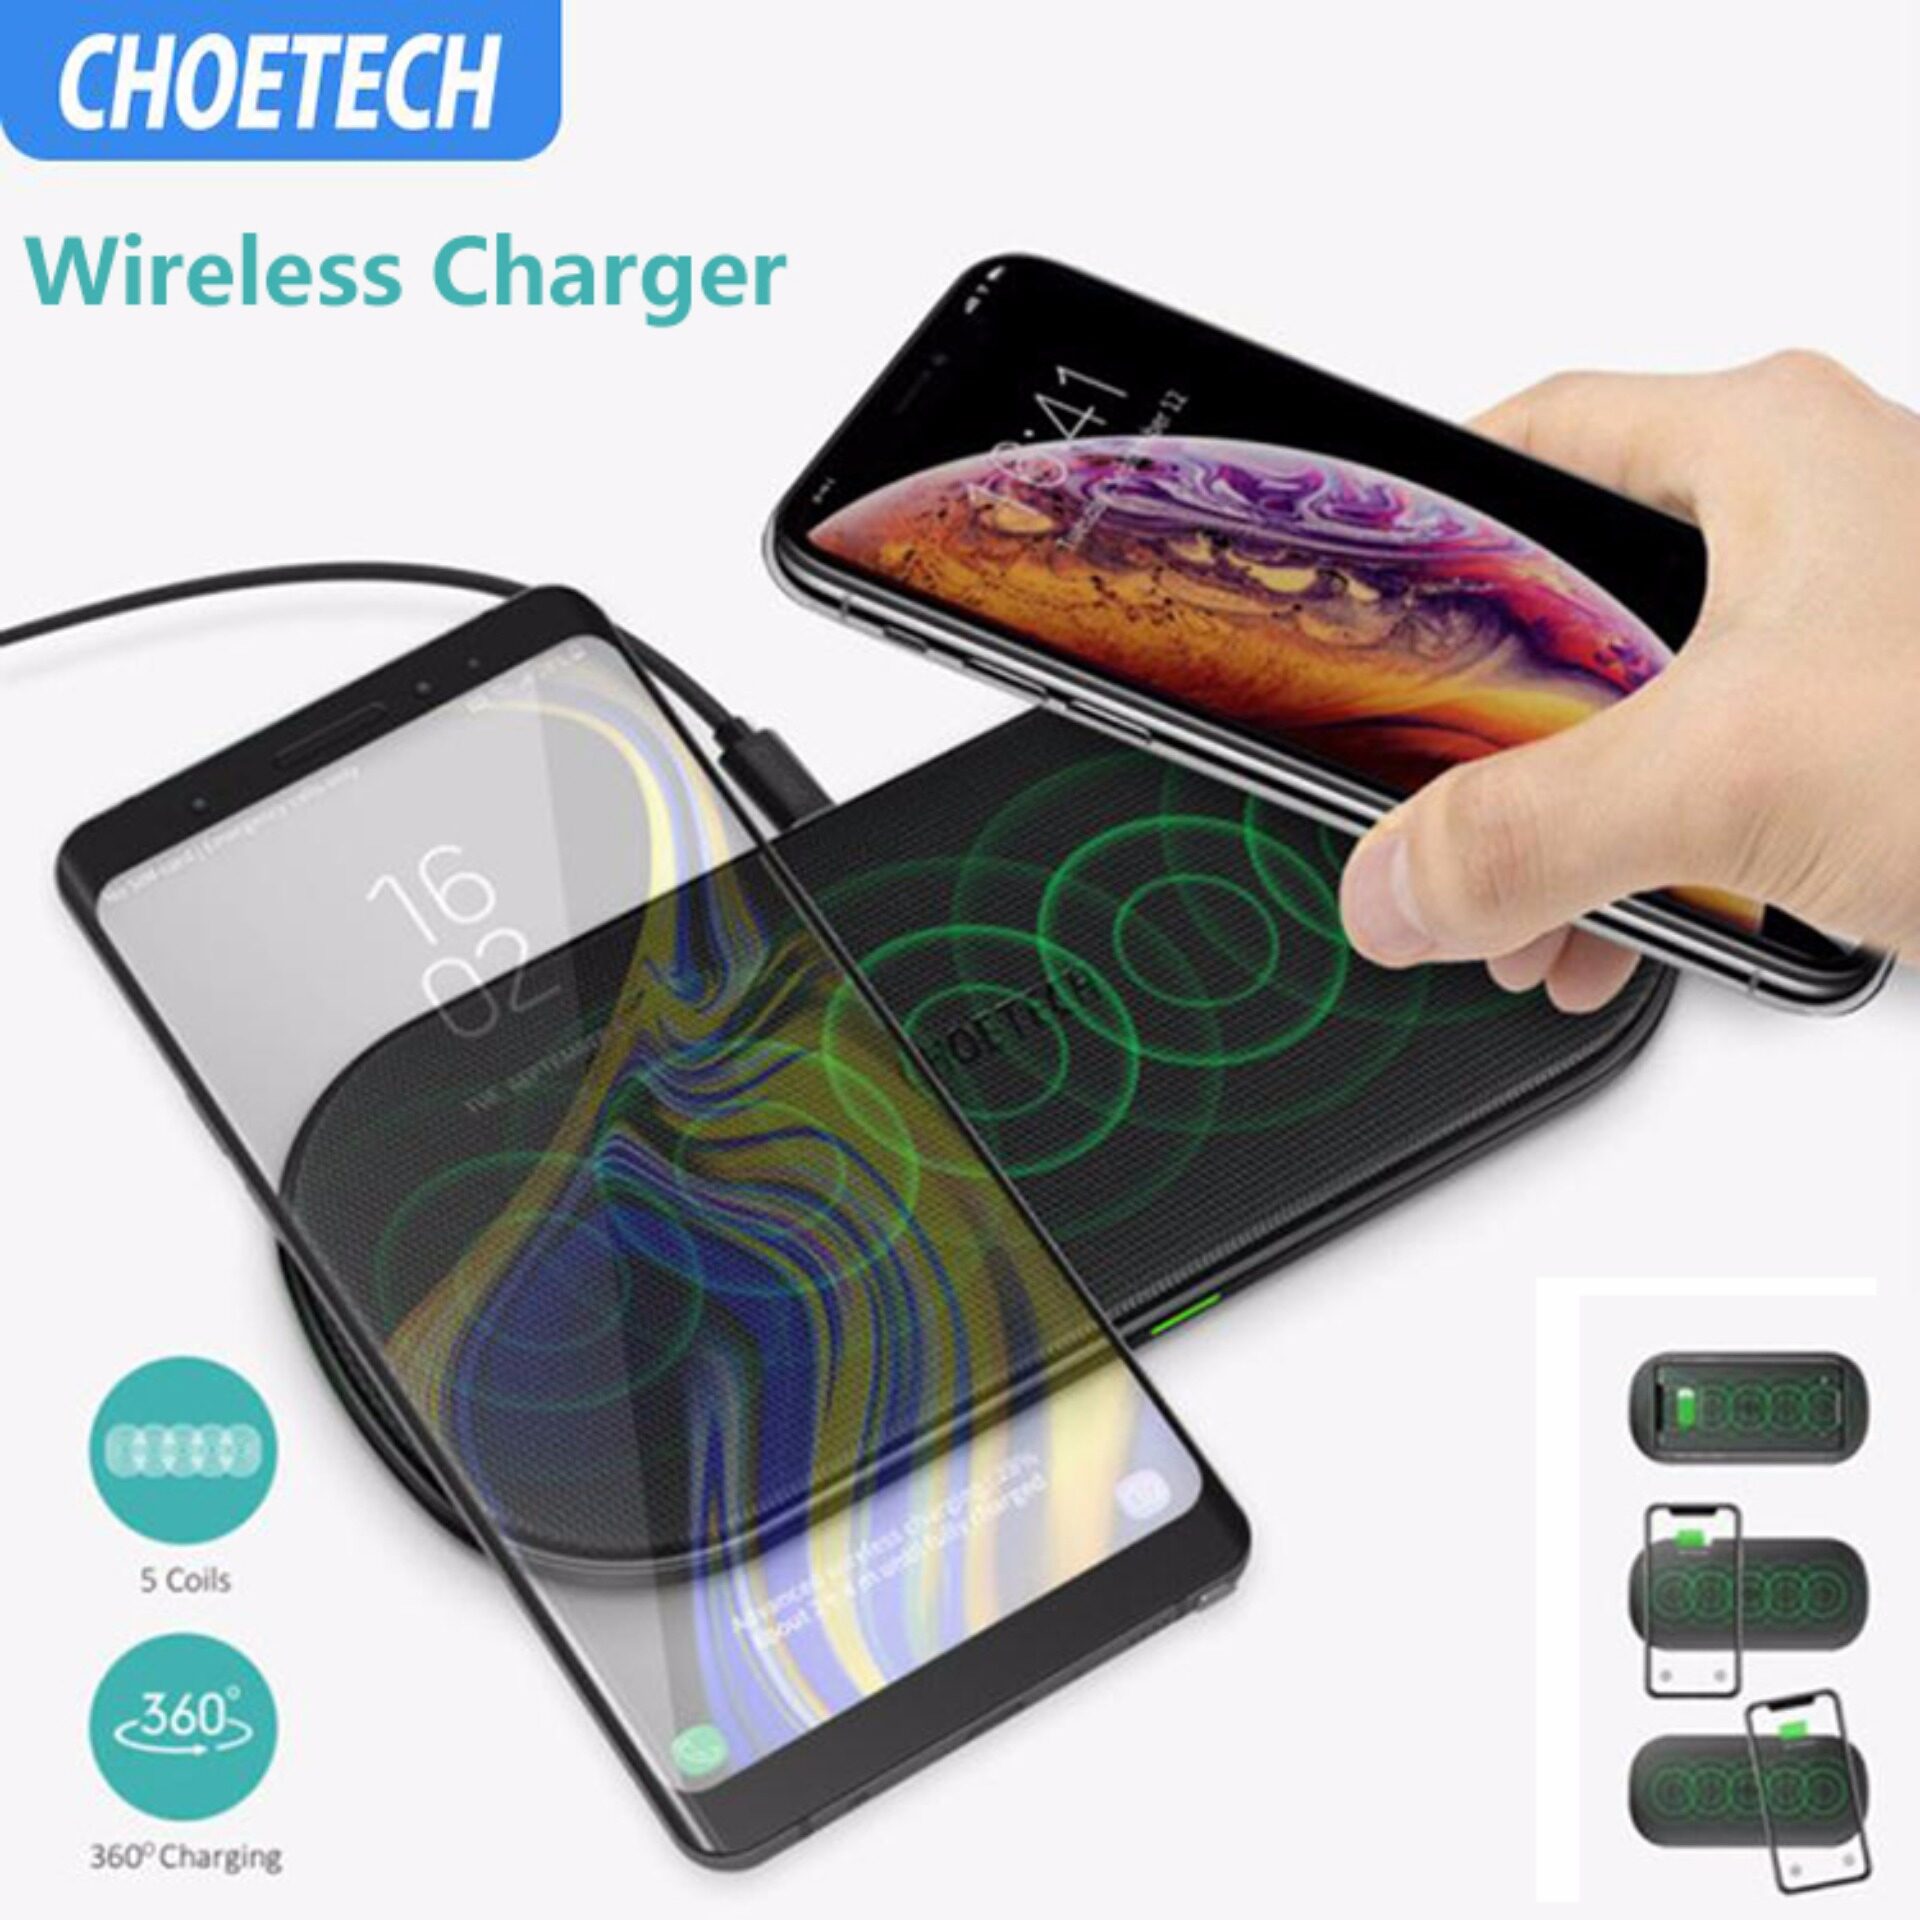 CHOETECH ที่ชาร์จแบตไร้สาย แท่นชาร์จแบต ชาร์จเร็ว 10W Qi Dual Wireless Charger 5 Coils Fast Charging Pad Compatible for iPhone X XS Max for Samsung S8 S9 S10 New AirPods